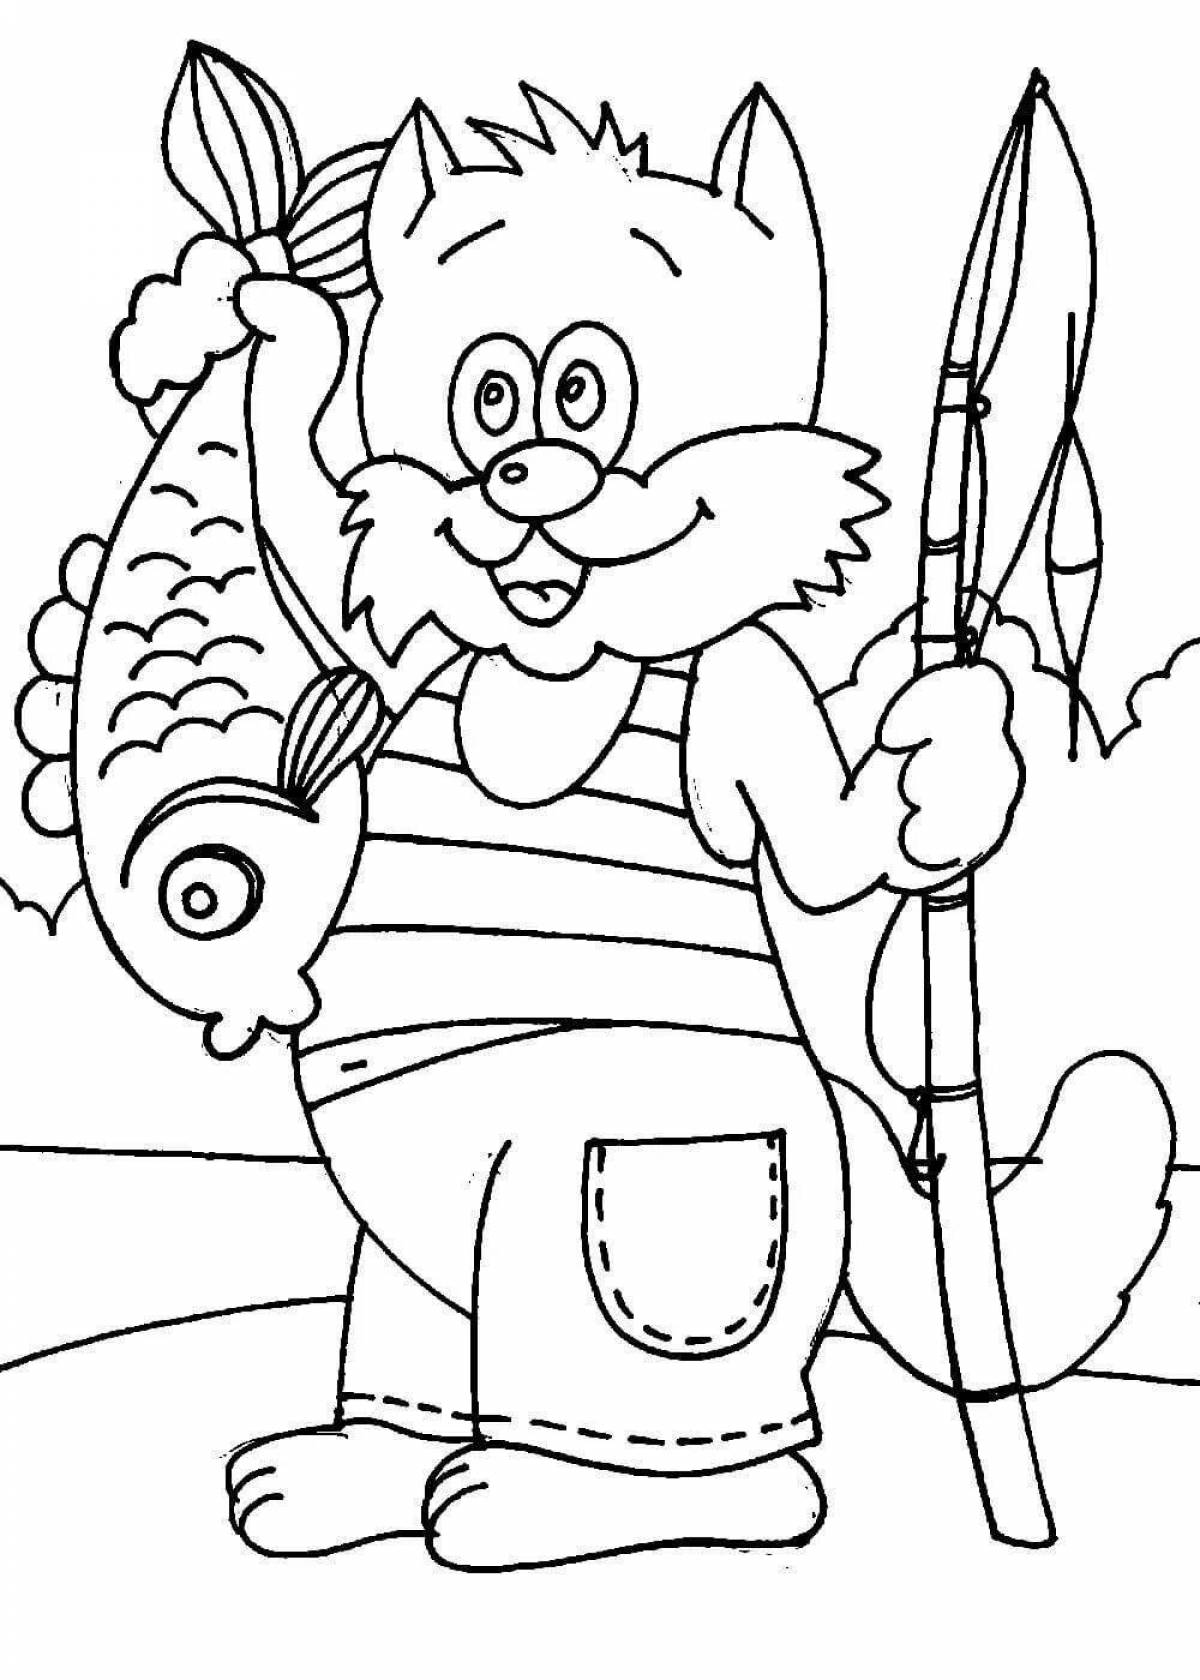 Suteev's comic tale coloring page